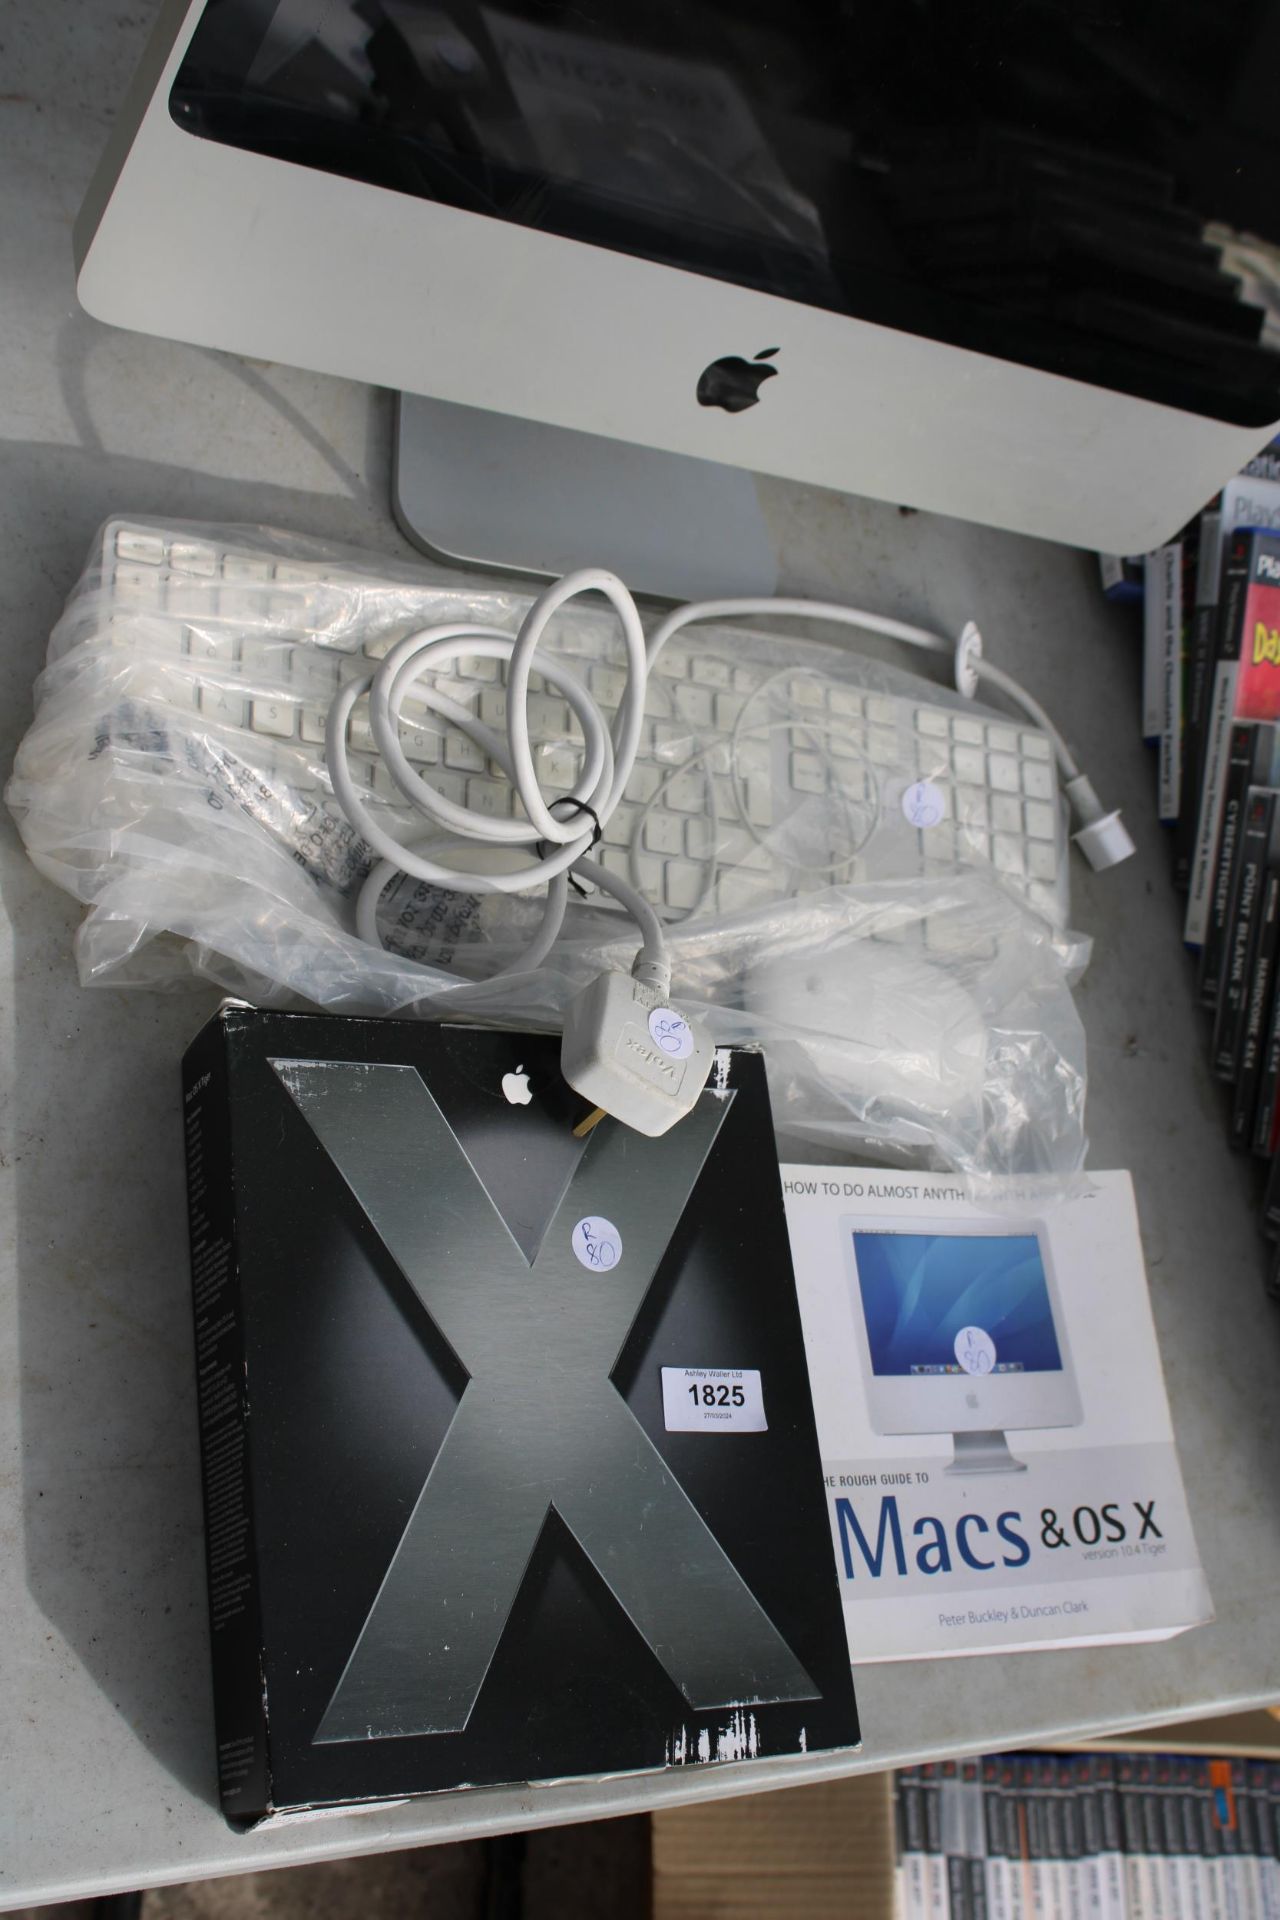 AN APPLE MAC COMPUTER, KEYBOARD, MOUSE AND MANUAL - Image 2 of 3